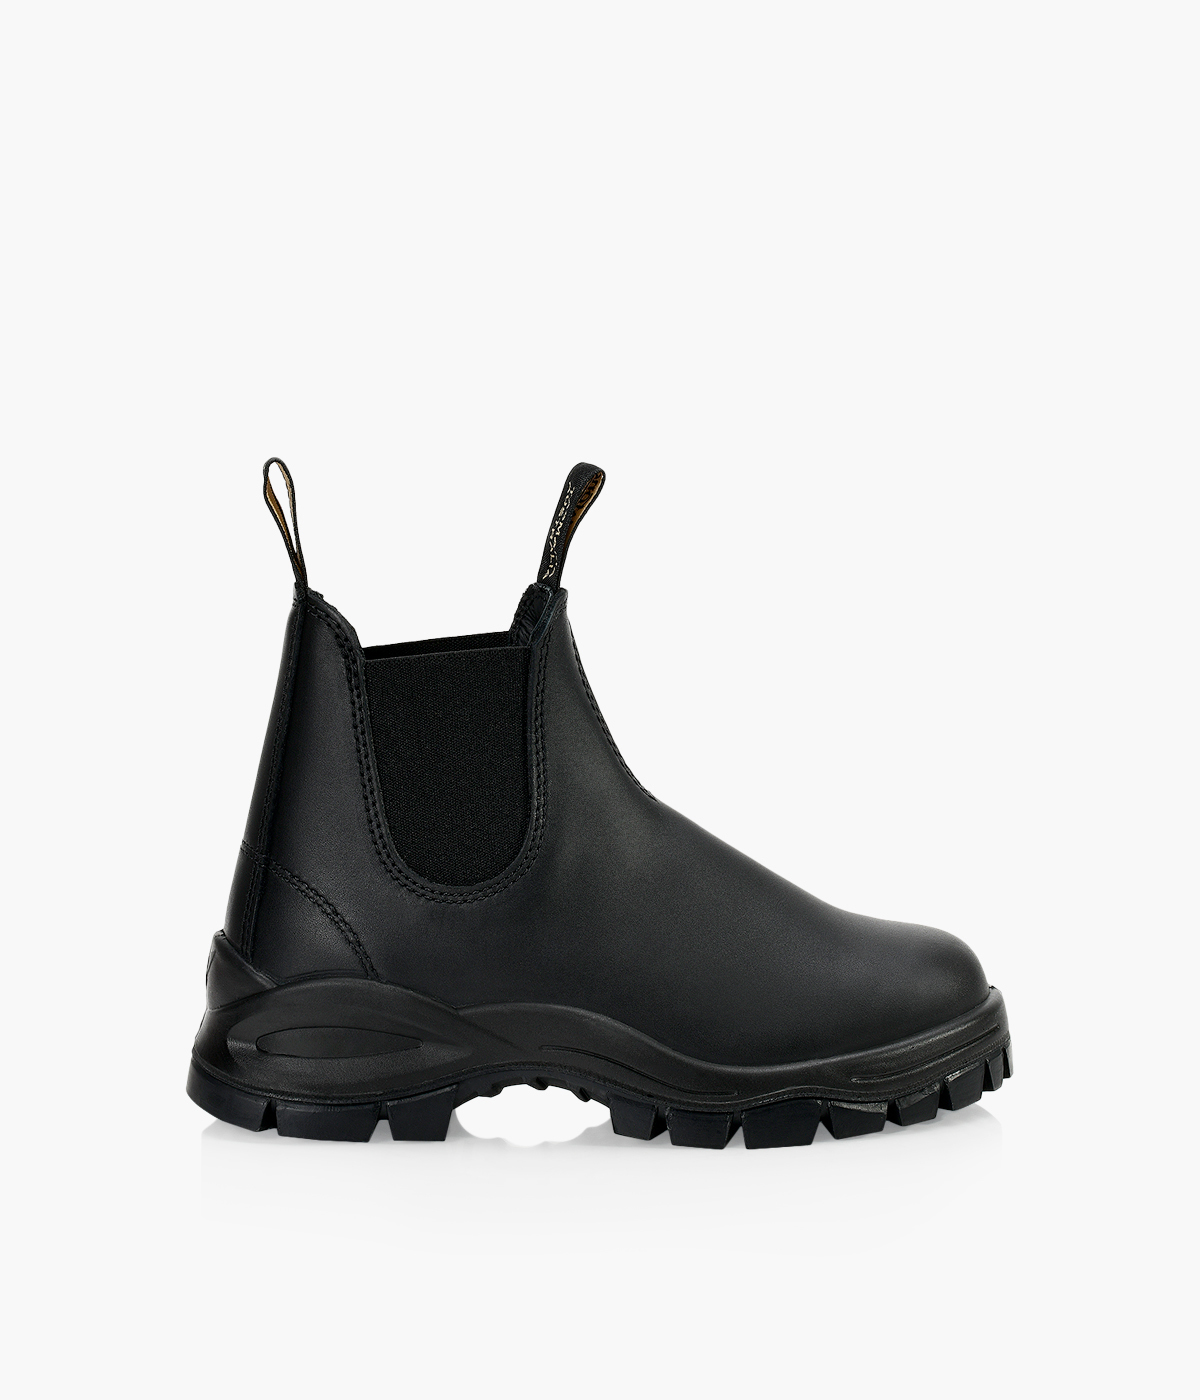 BLUNDSTONE LUG BOOT 2240 - Black | Browns Shoes